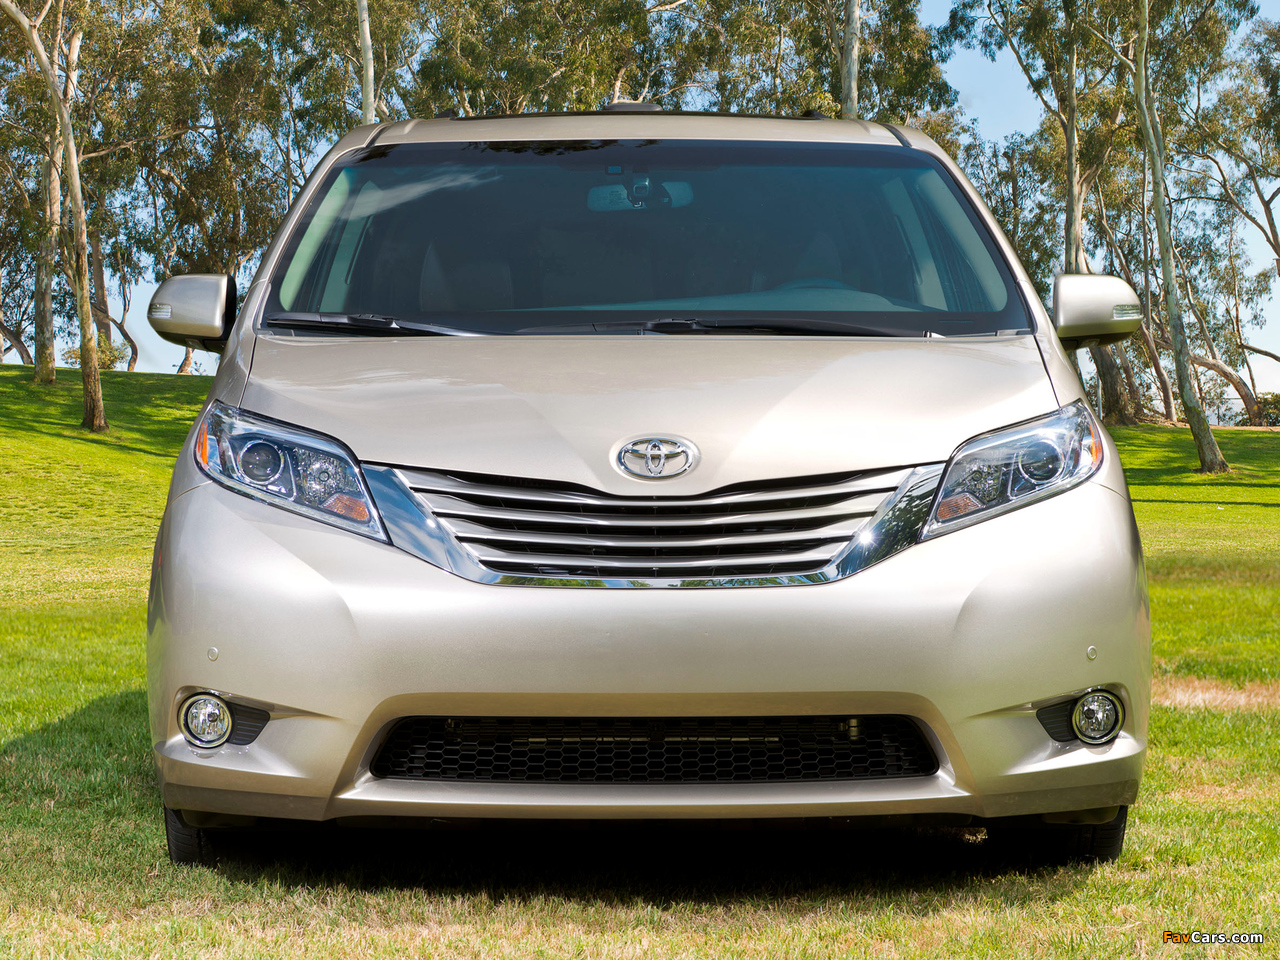 Images of 2015 Toyota Sienna 2014 (1280 x 960)